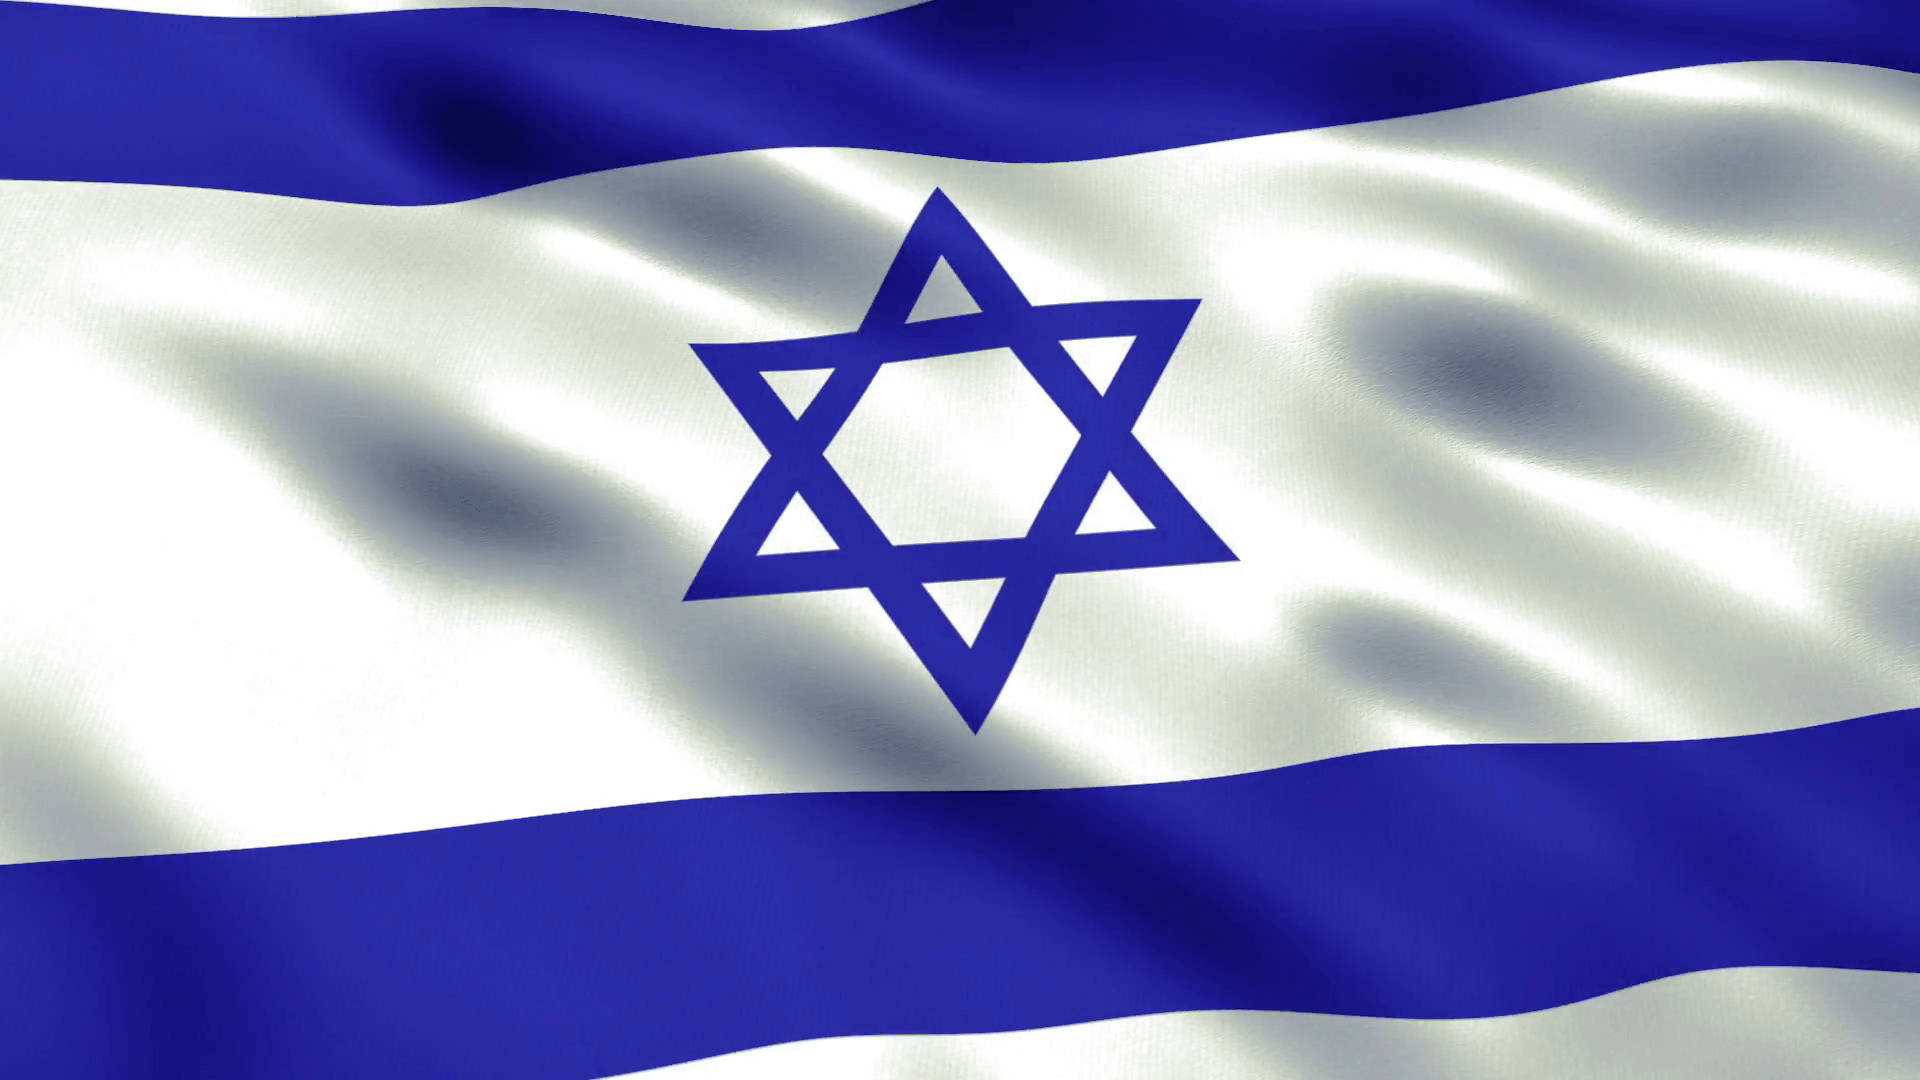 Israel Flag With Satin Texture Background